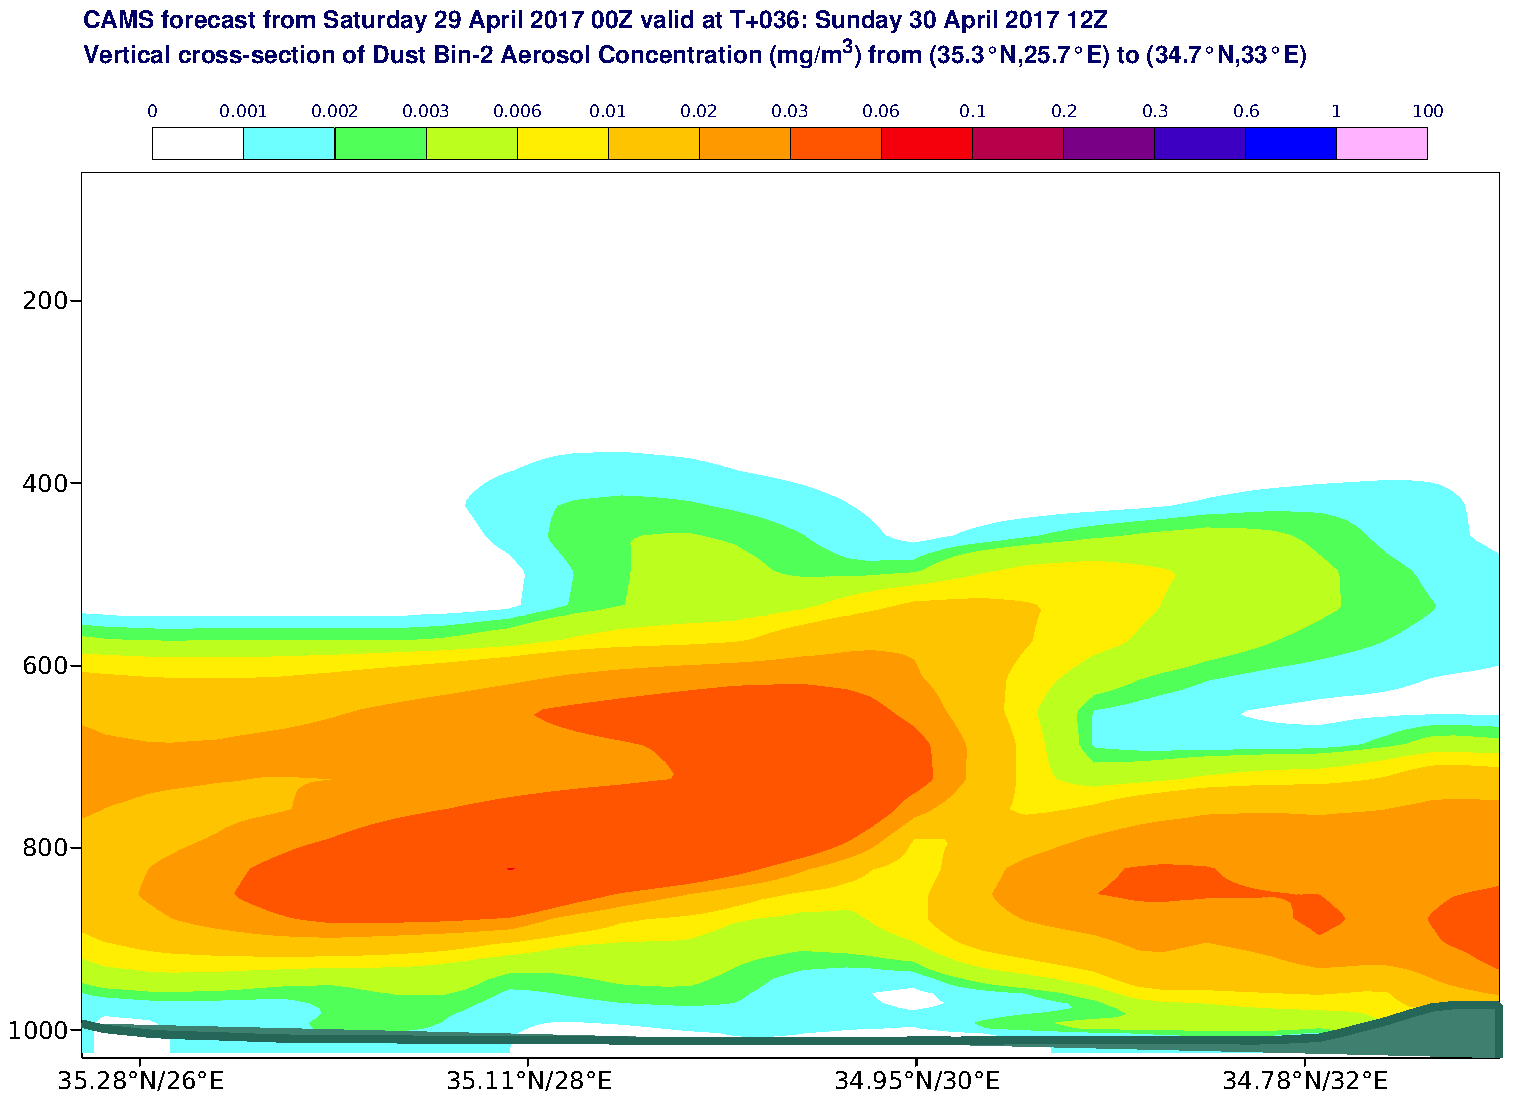 Vertical cross-section of Dust Bin-2 Aerosol Concentration (mg/m3) valid at T36 - 2017-04-30 12:00